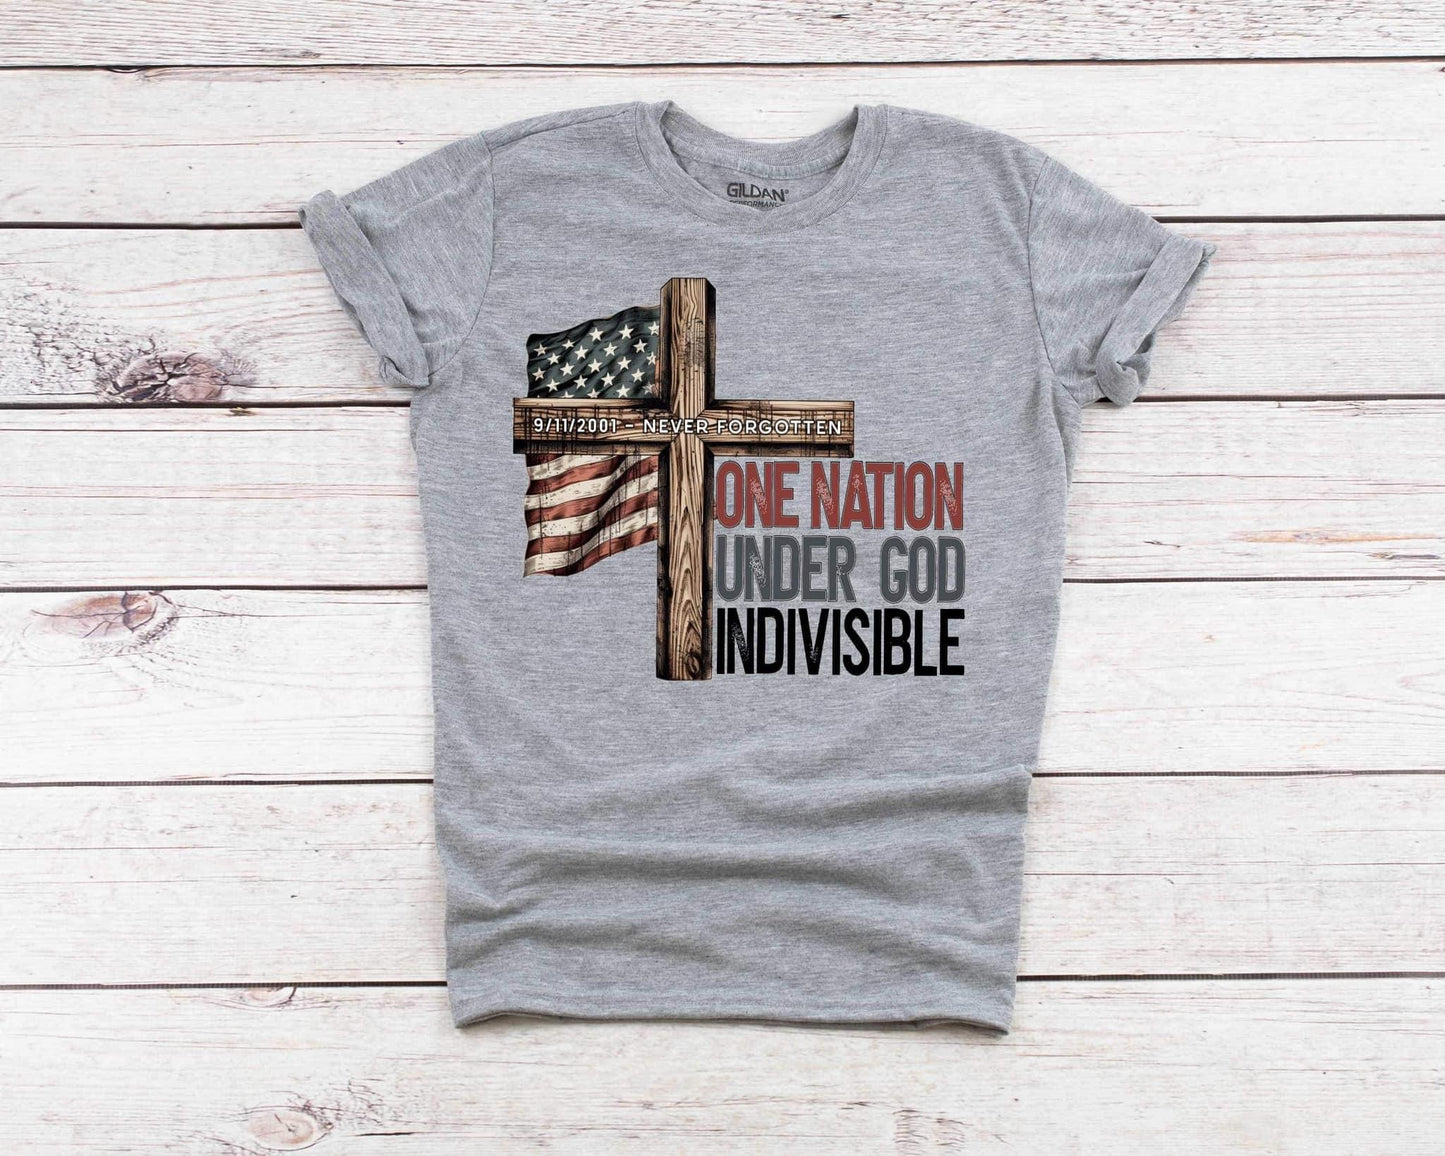 One Nation Under God Indivisible (9-11) *Ollie & Co. Exclusive*